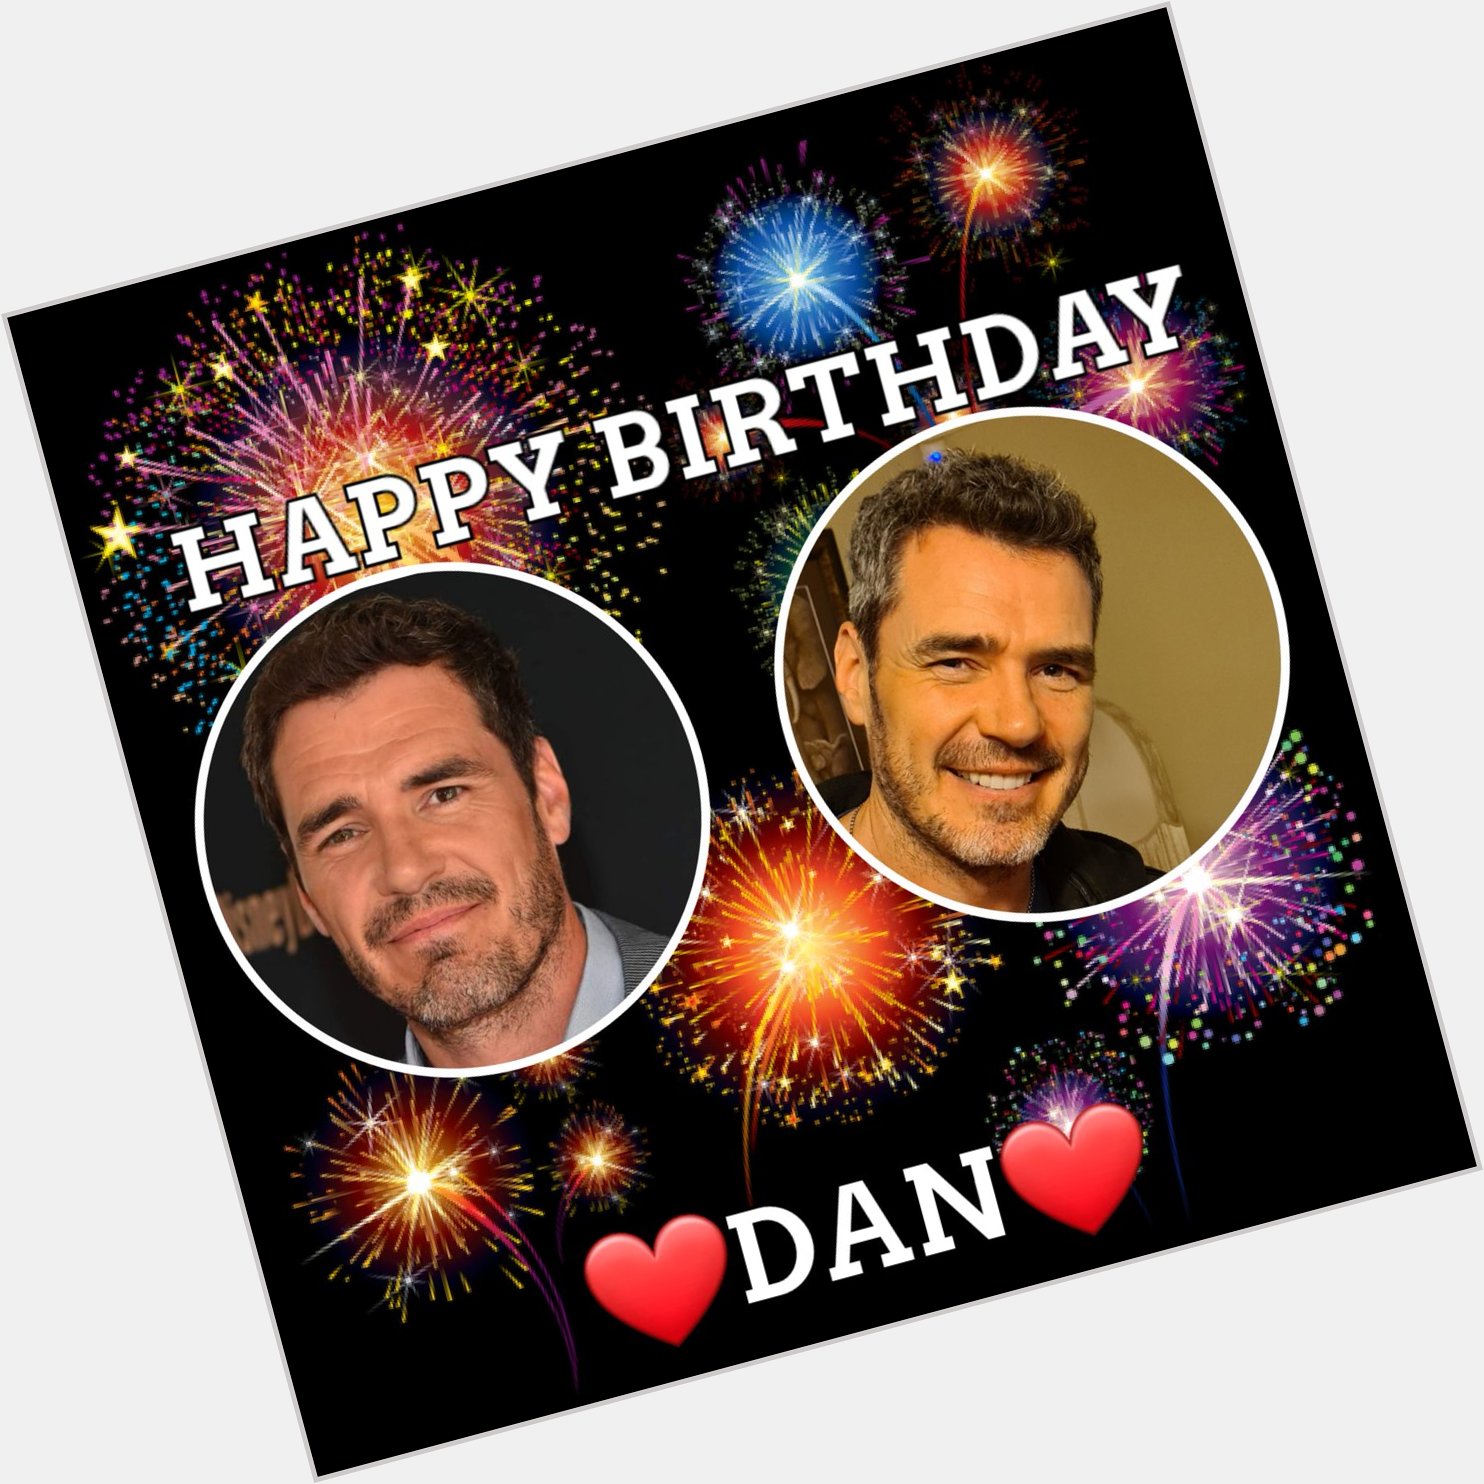 BIG HAPPY BIRTHDAY TO DAN PAYNE HOPE YOU HAVE AN AMAZING DAY      